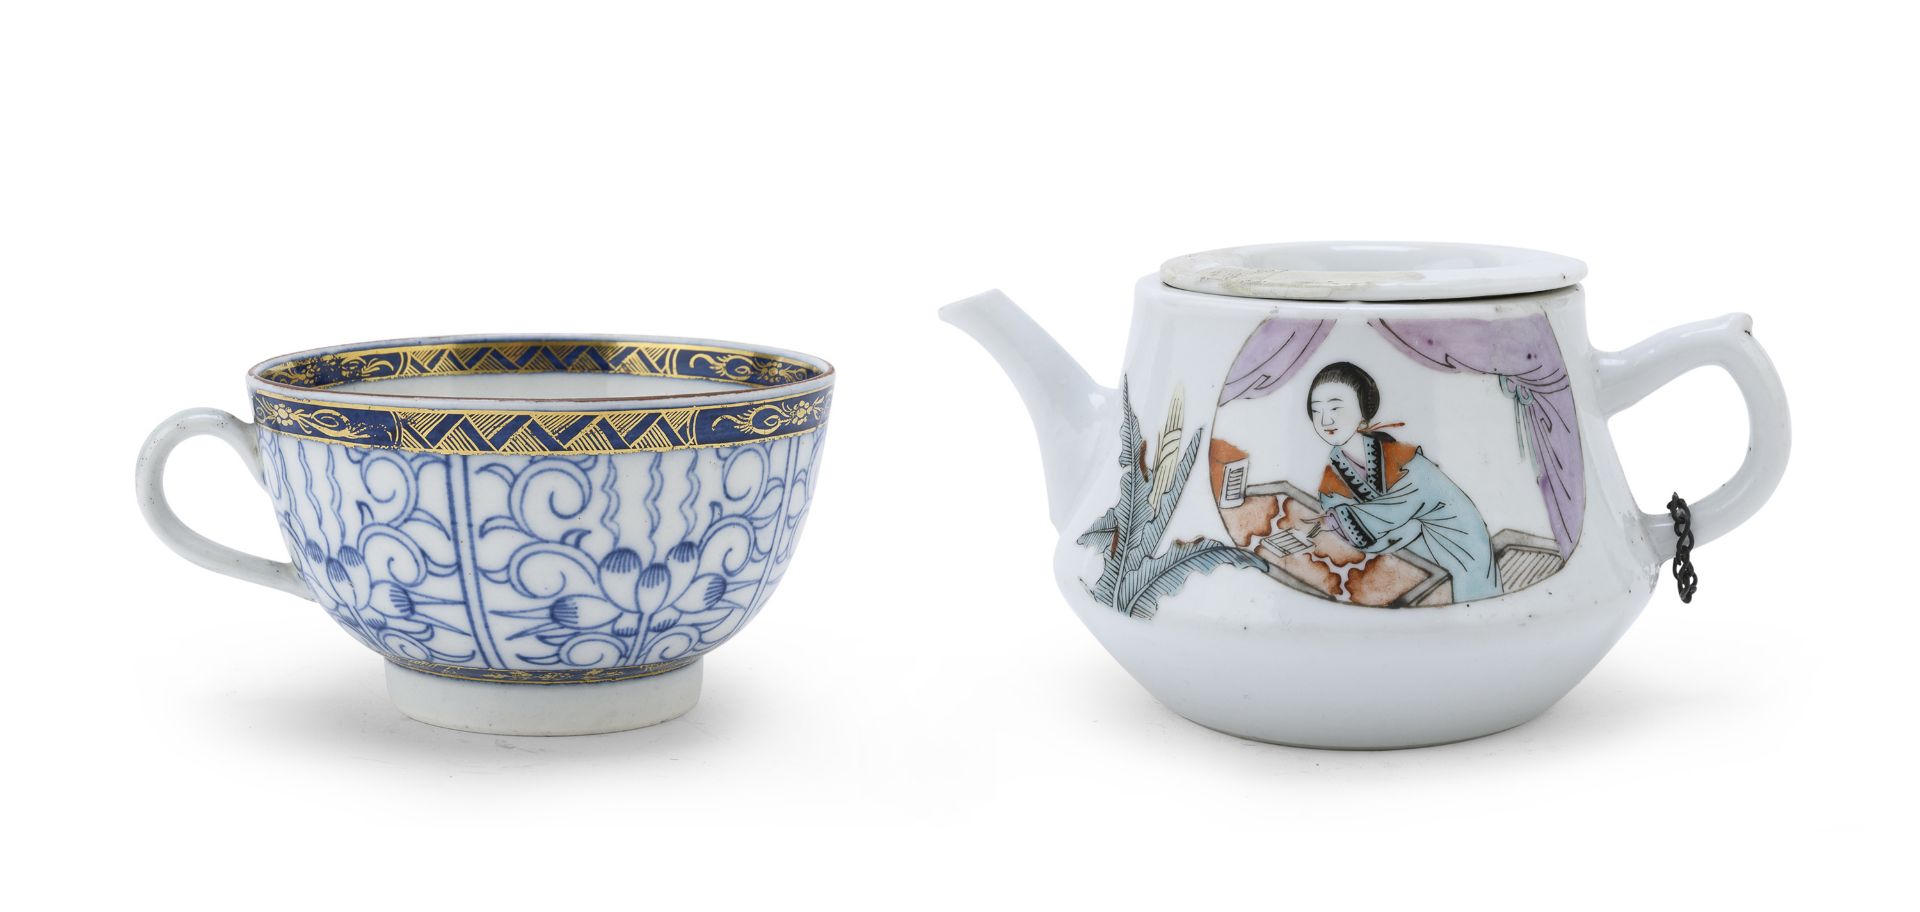 CUP AND TEA-POT IN PORCELAIN. CHINA 20TH CENTURY